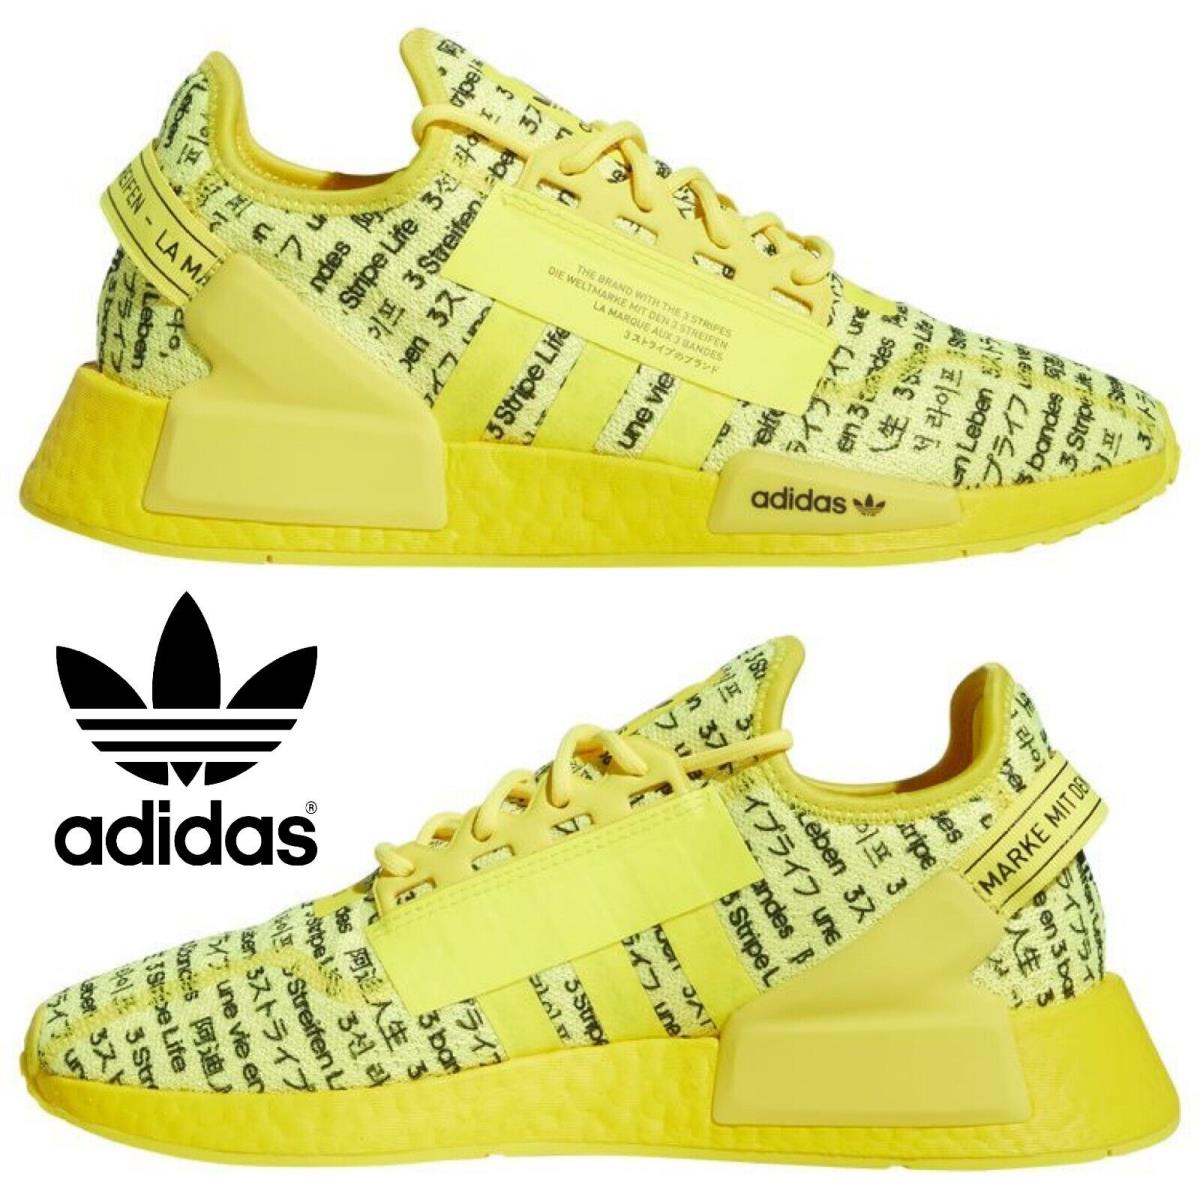 Adidas Originals Nmd R1 V2 Men`s Sneakers Running Shoes Gym Casual Sport Yellow - Yellow , Yellow/Black Manufacturer